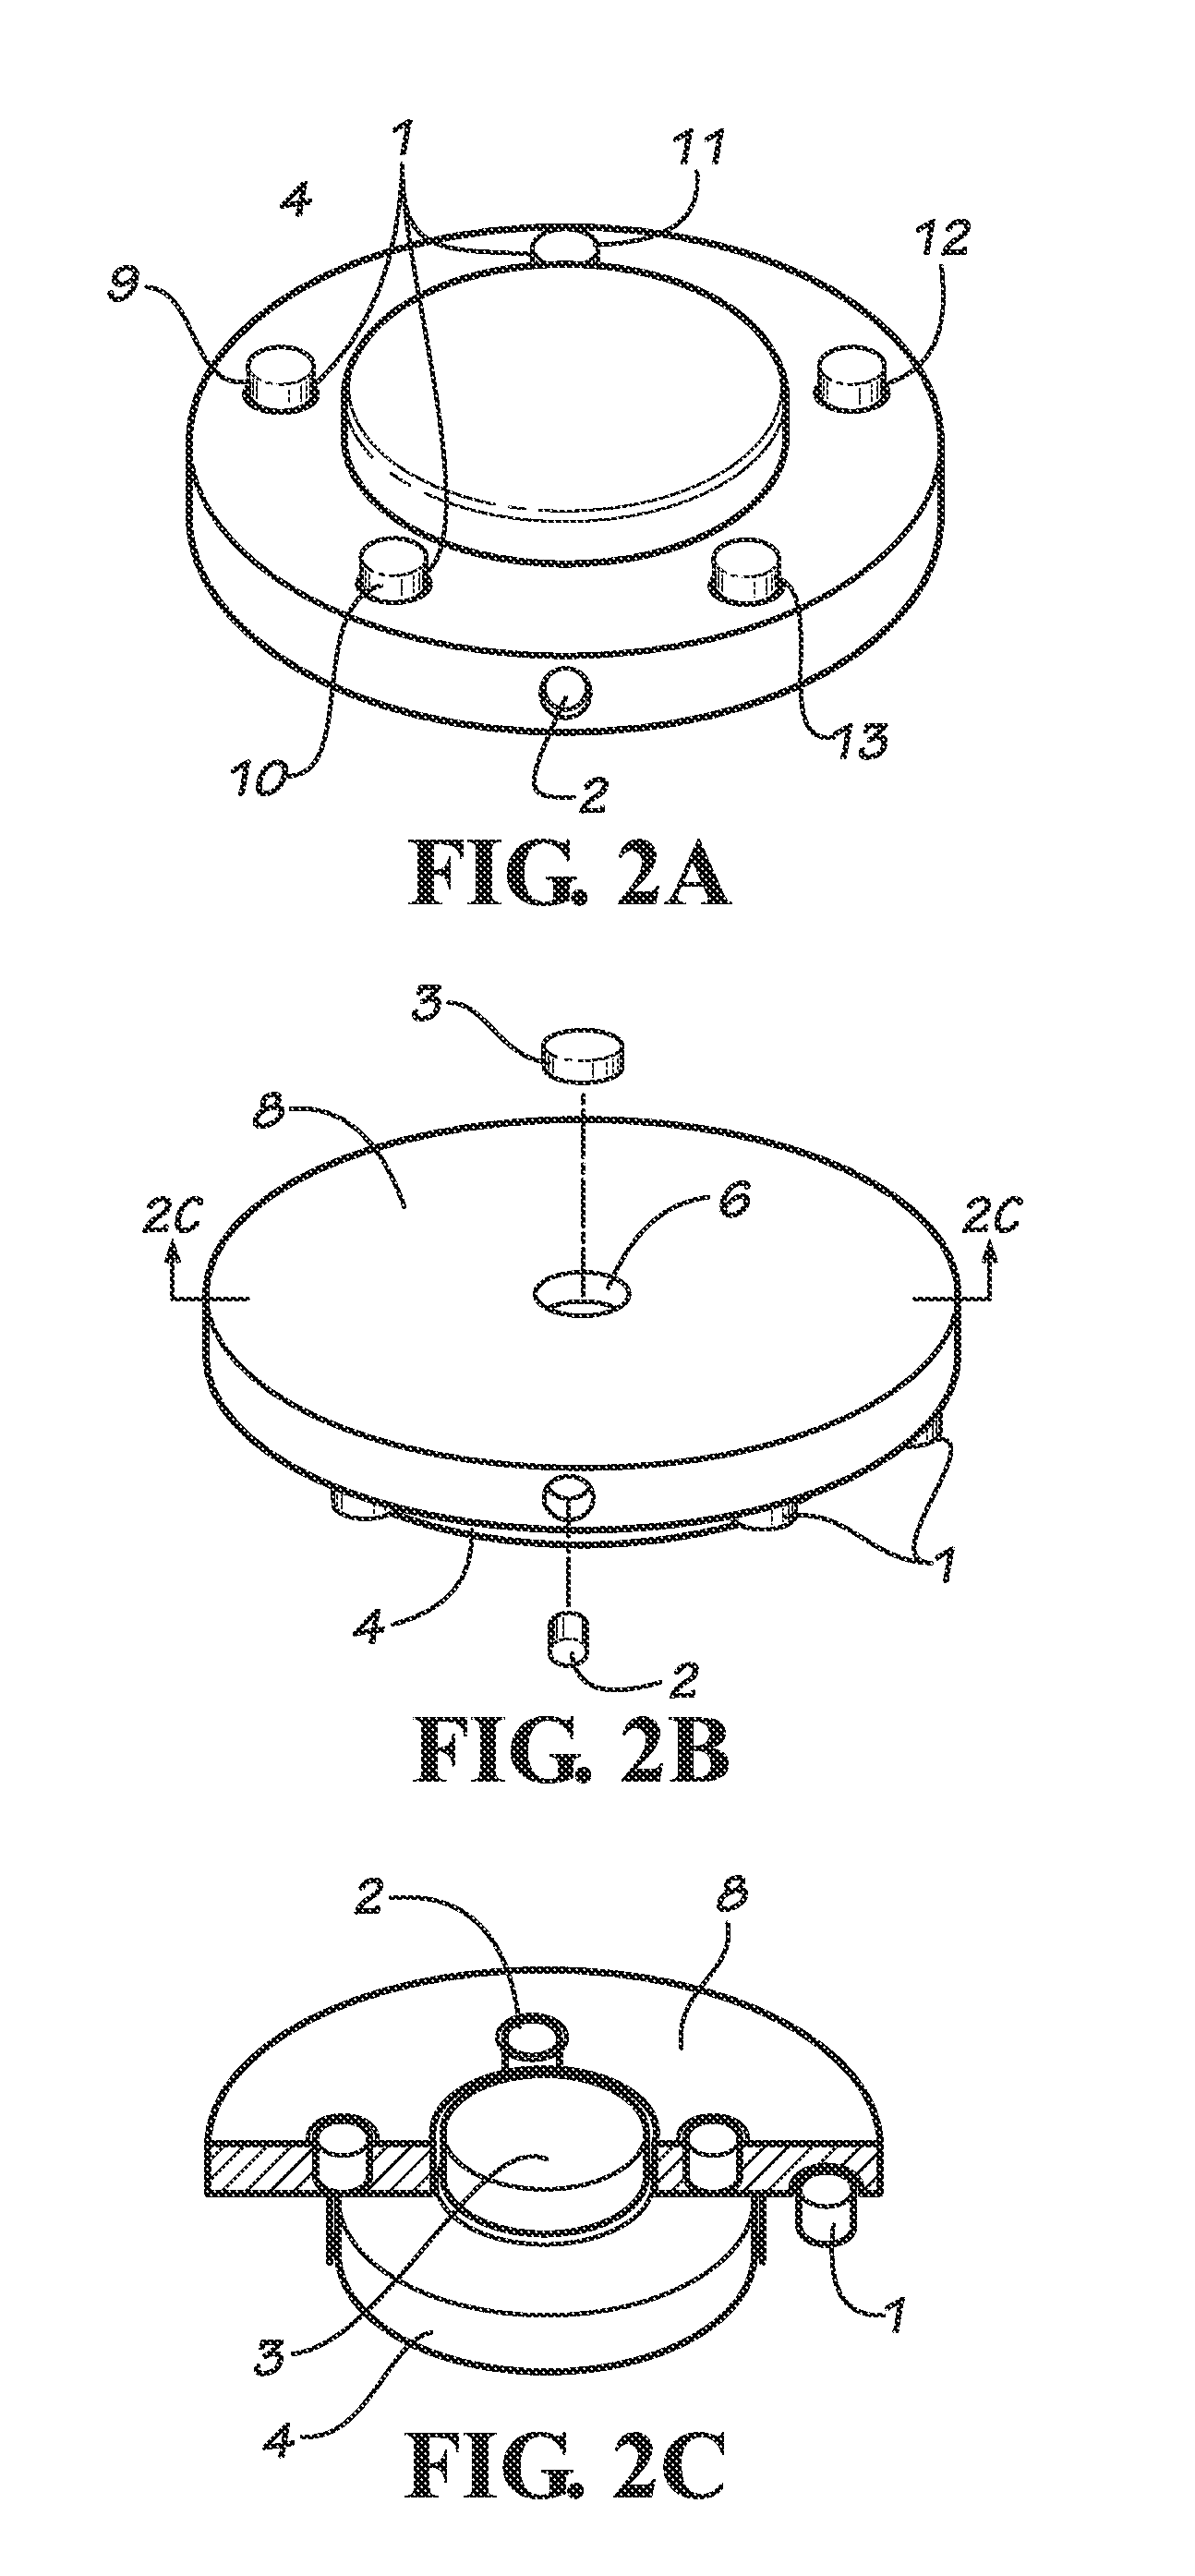 Personal Device and Method for Integration of Mind/Body Focus Energy